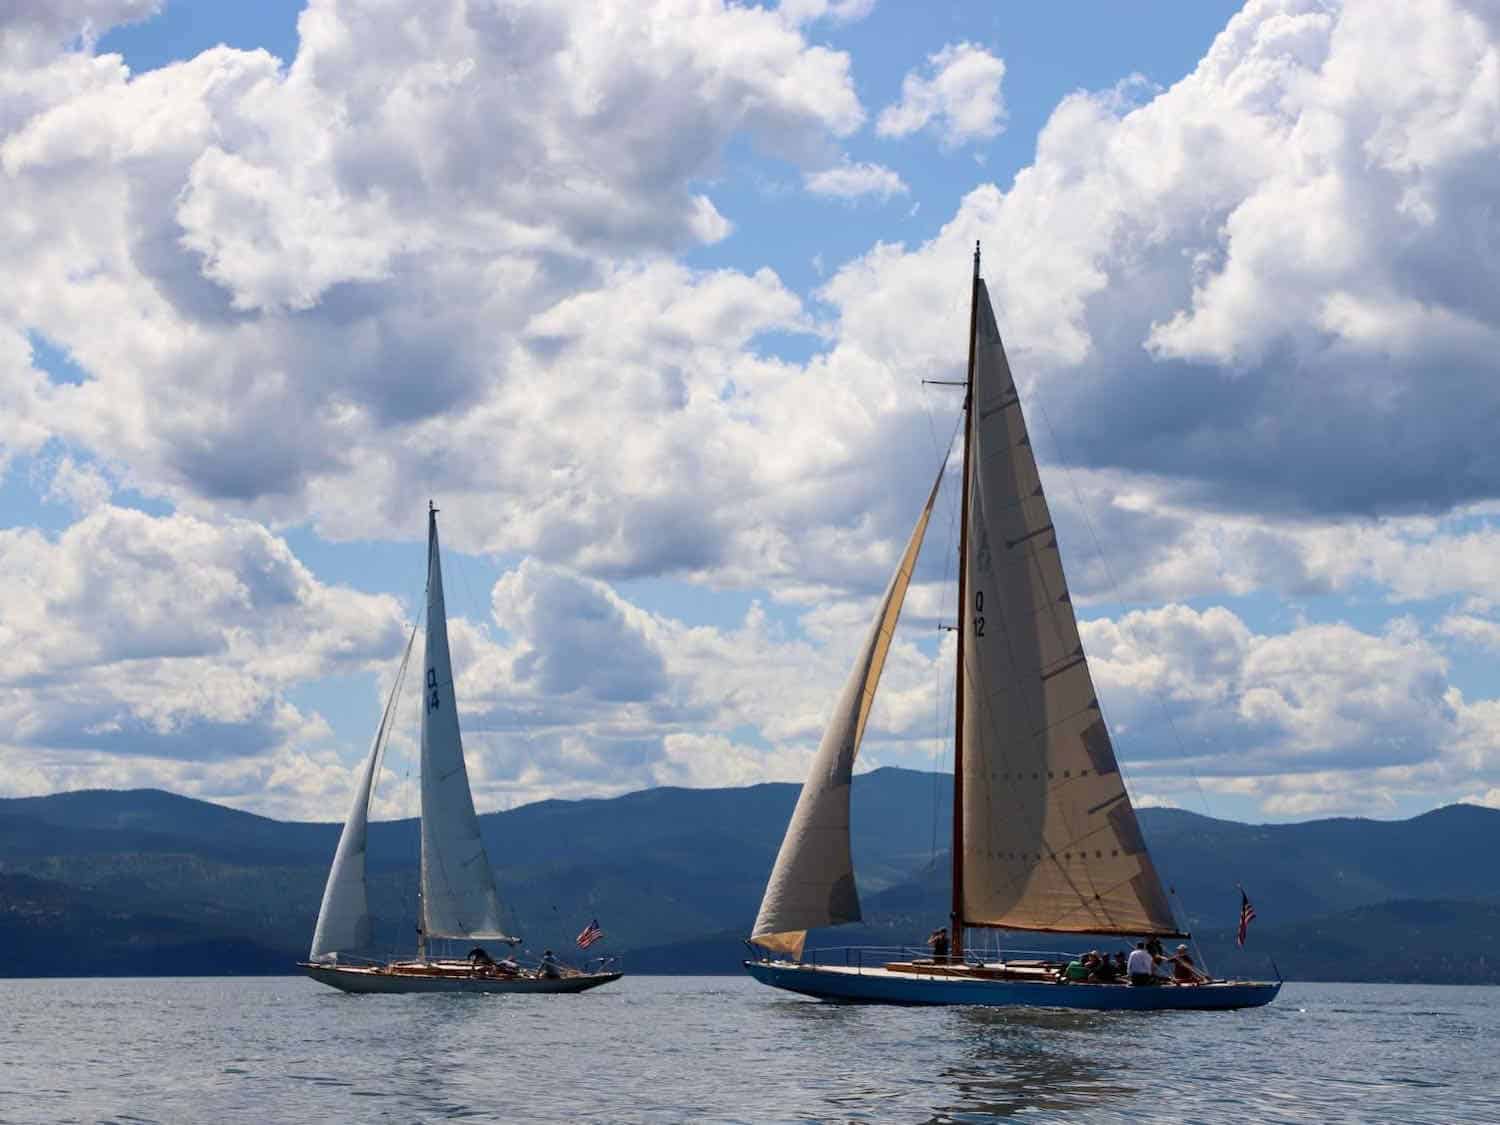 Two sailboats on Flathead Lake with mountains in the distance.